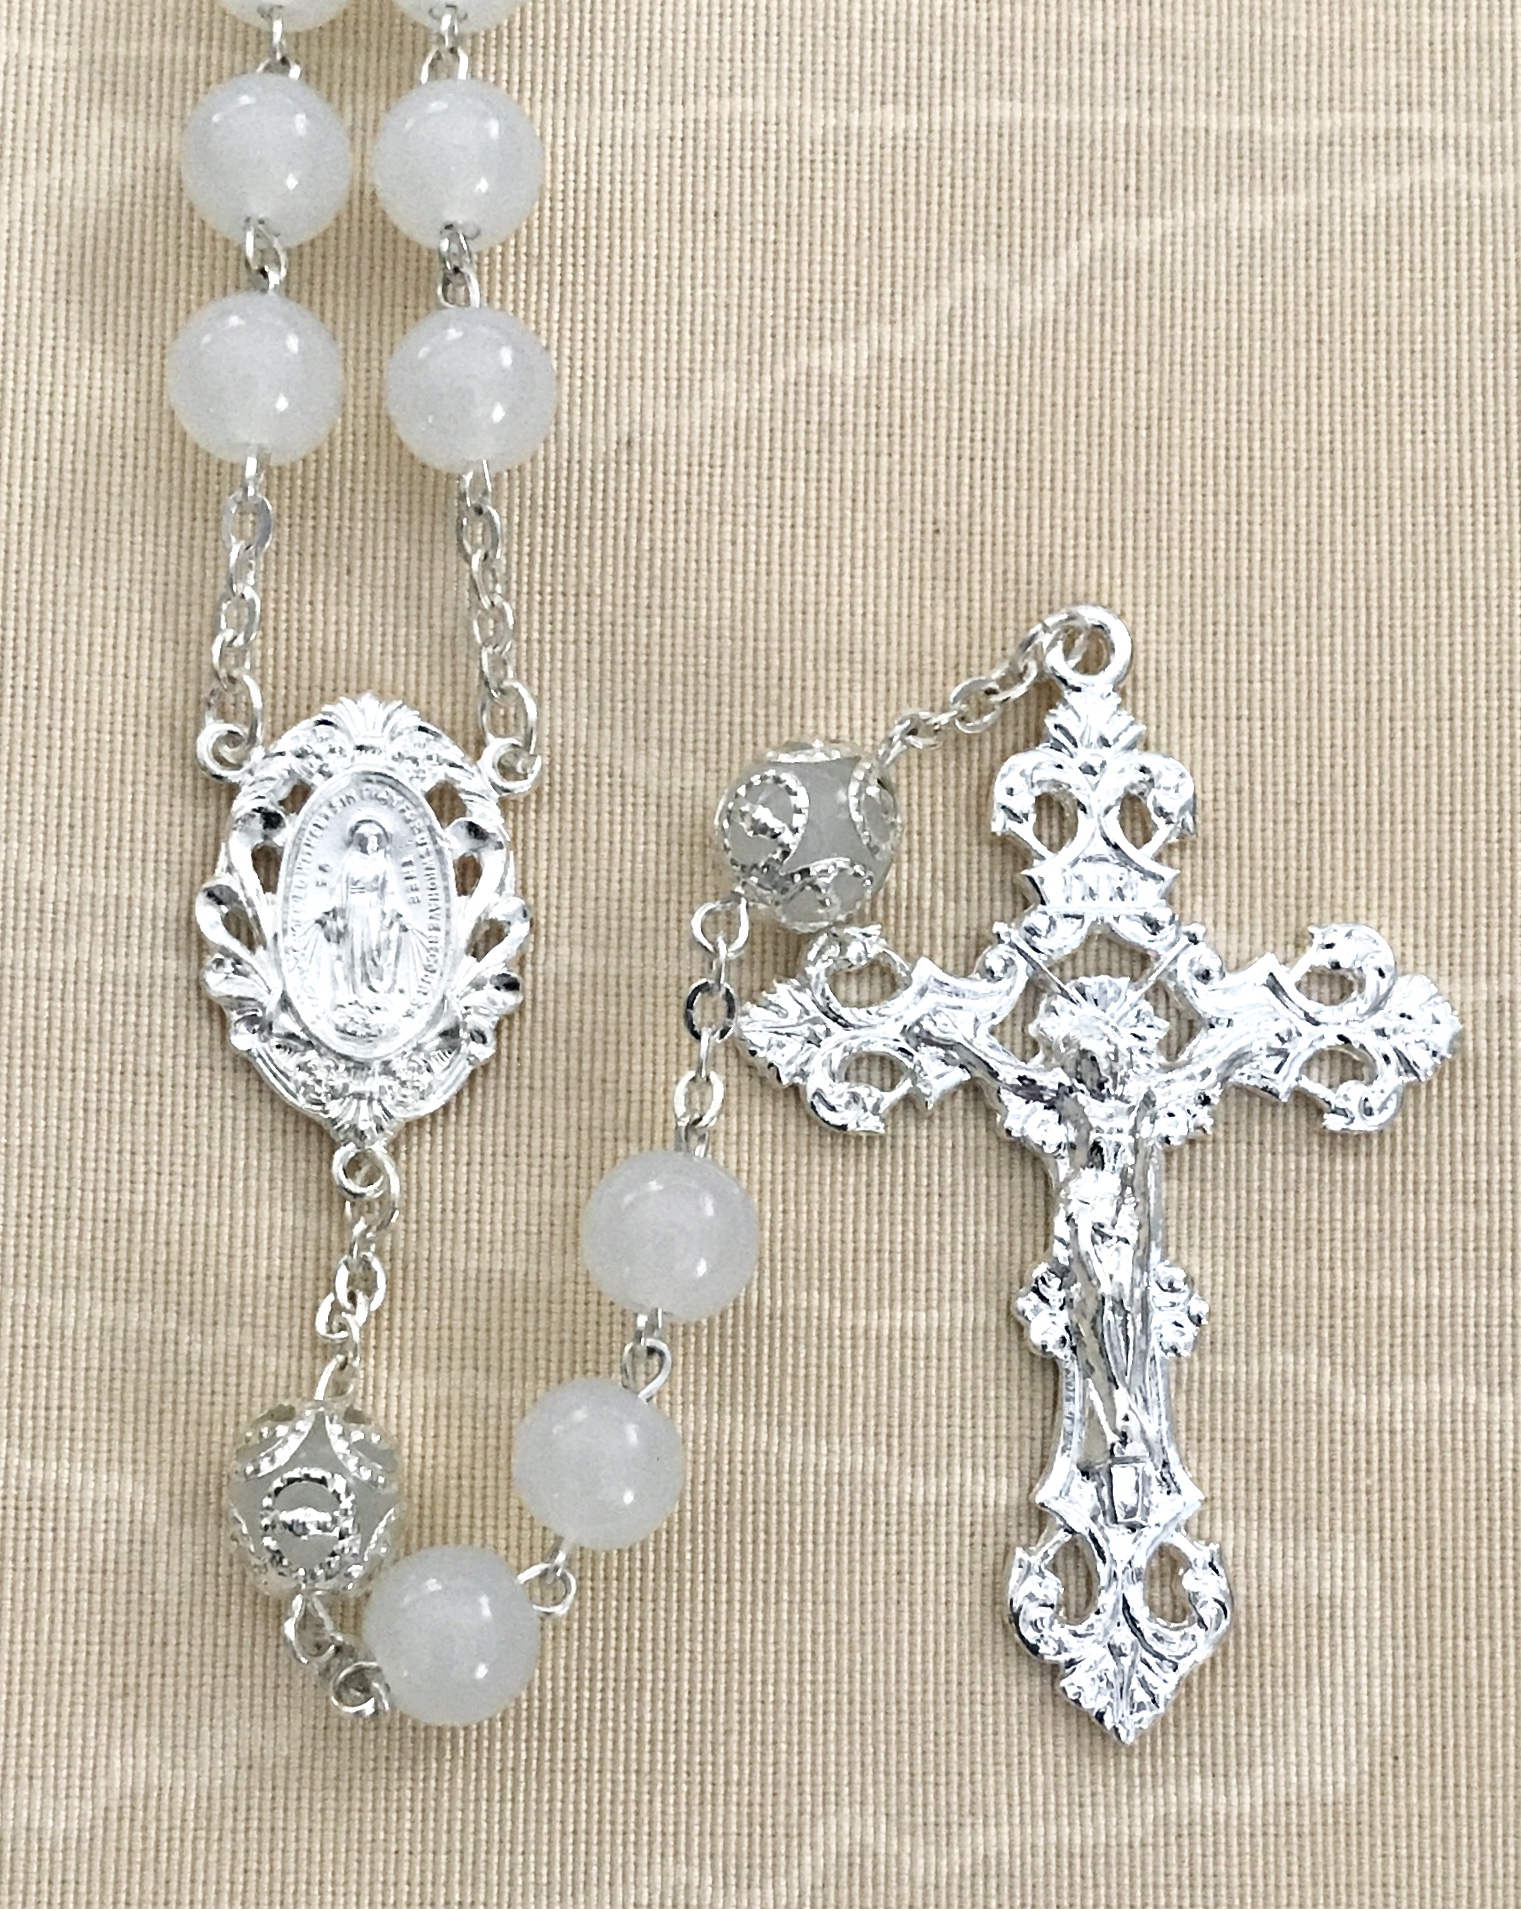 8mm WHITE GLASS ROSARY WITH CAPPED OUR FATHER BEADS AND STERLING SILVER PLATED CRUCIFIX AND CENTER GIFT BOXED